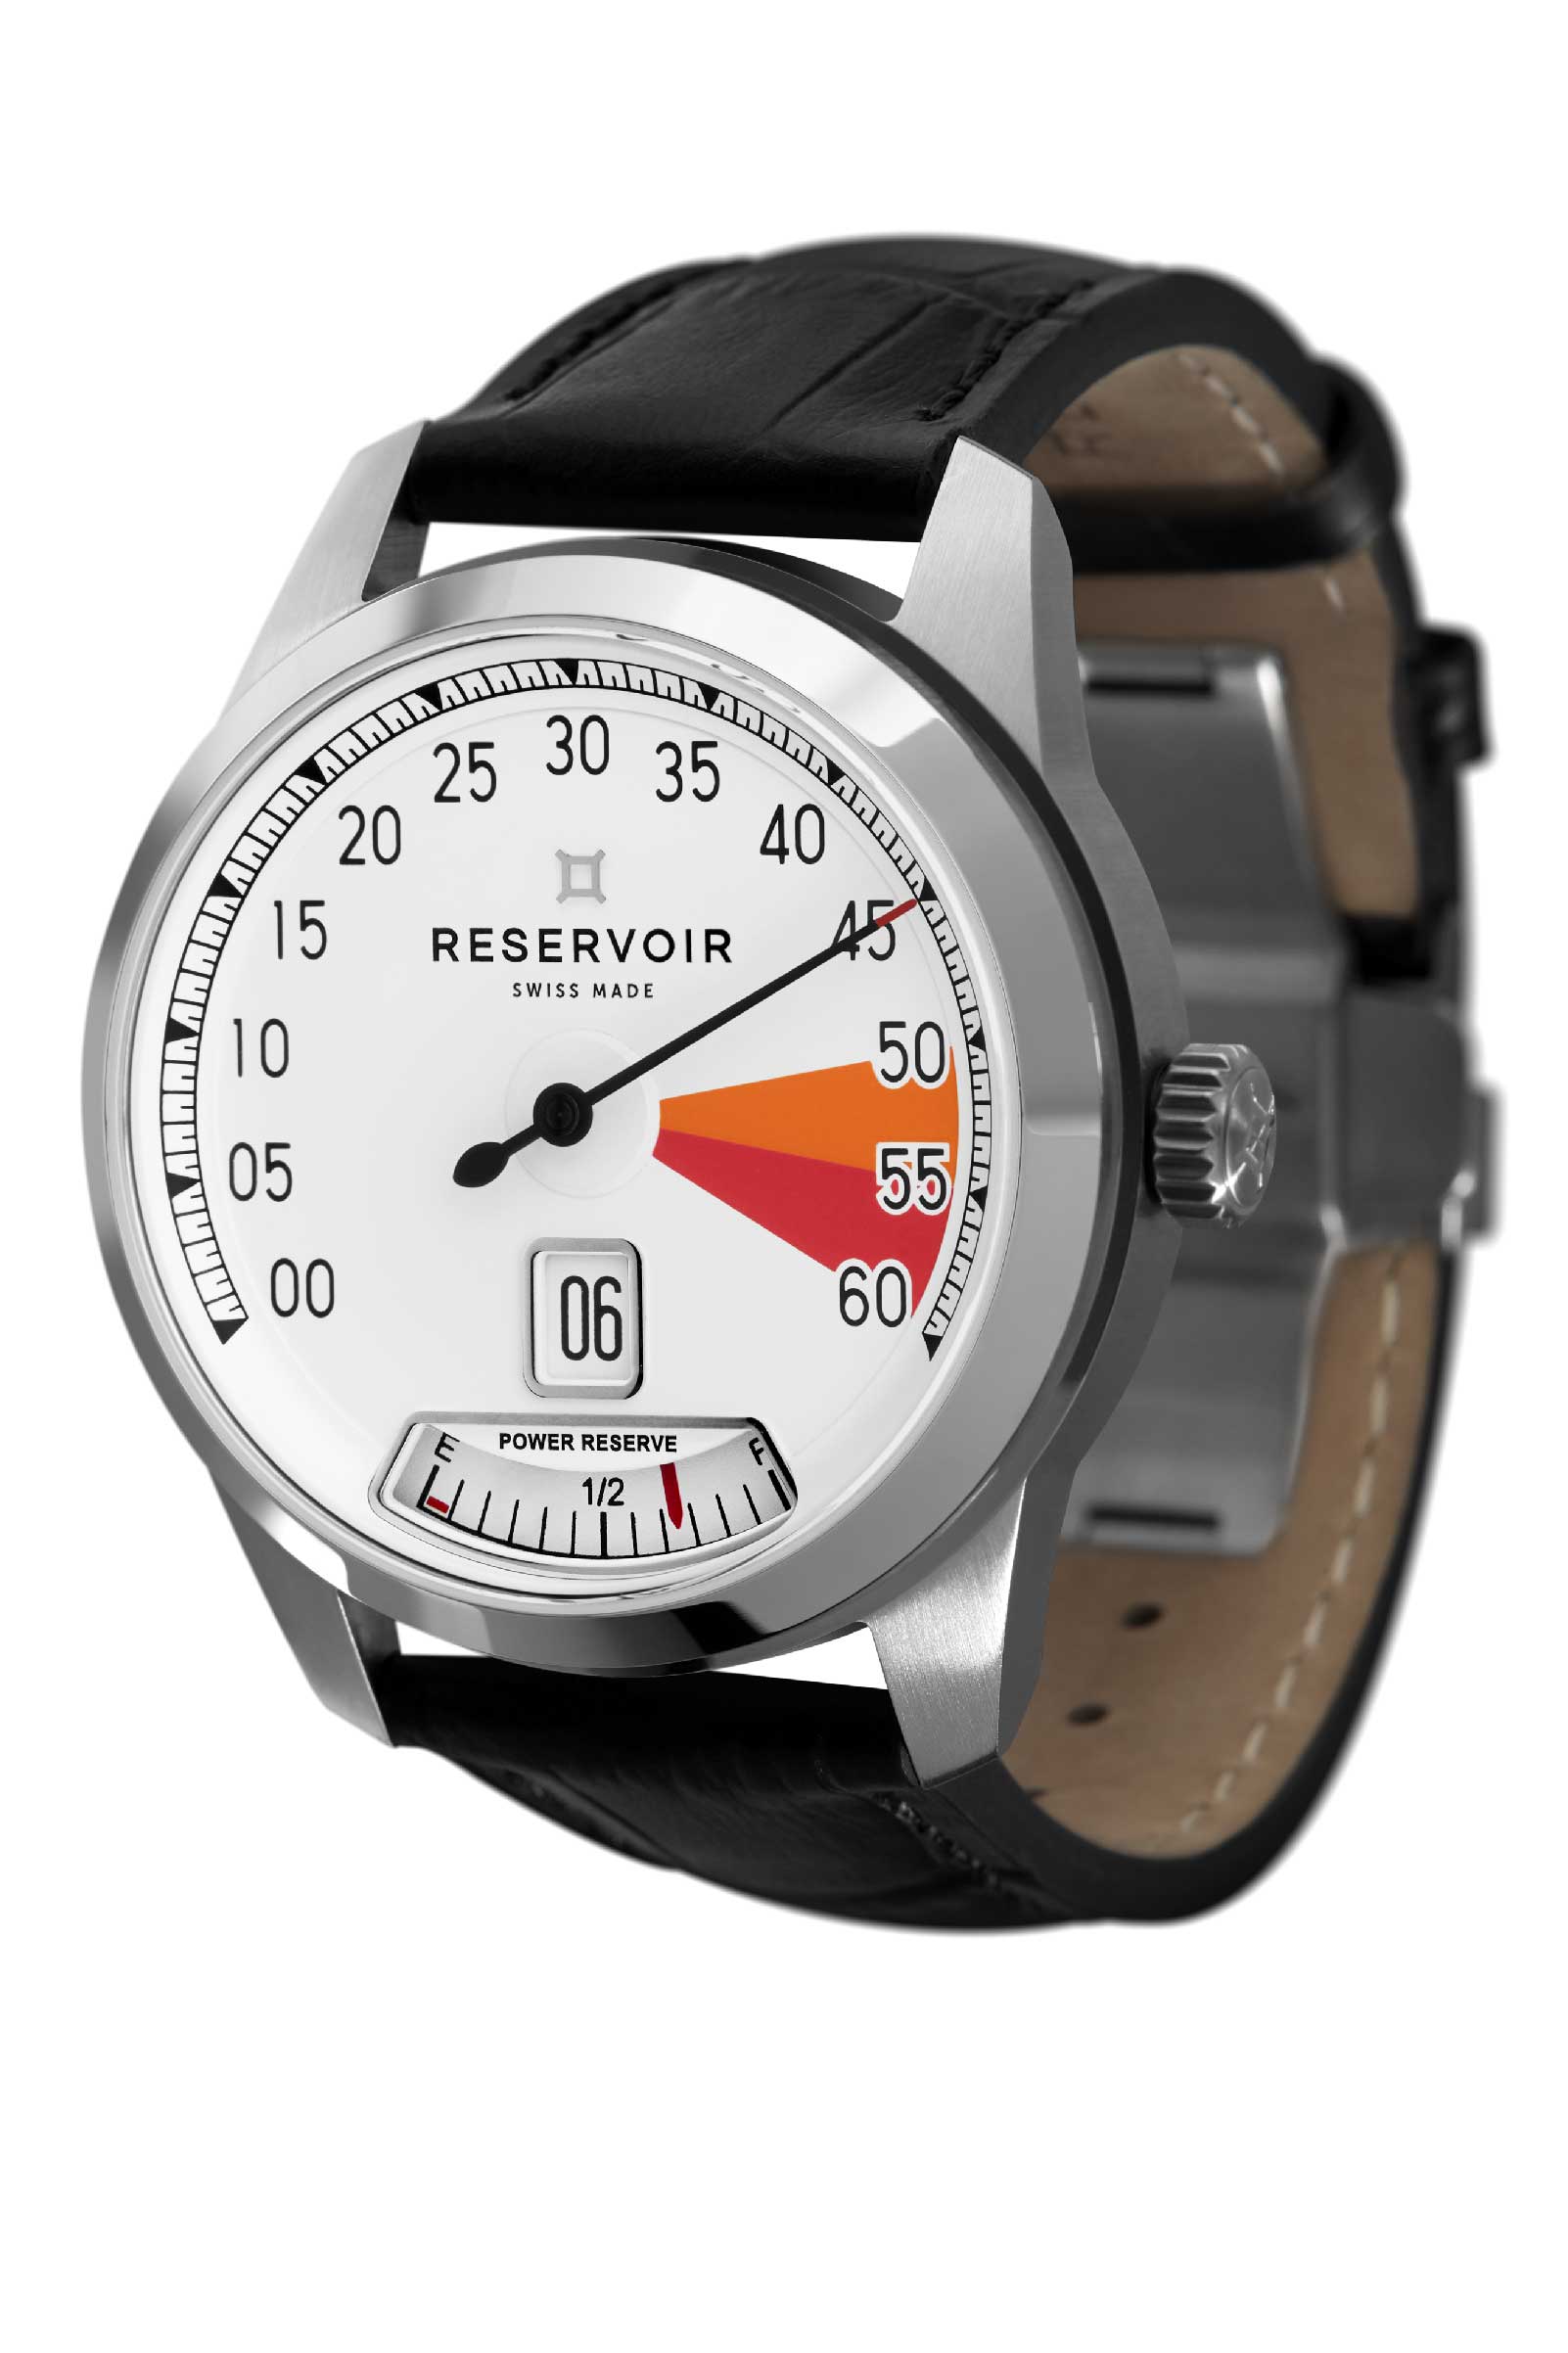 Vintage Car RPM Counter Watch Luxury in black Grey, Off-White and Light Grey.